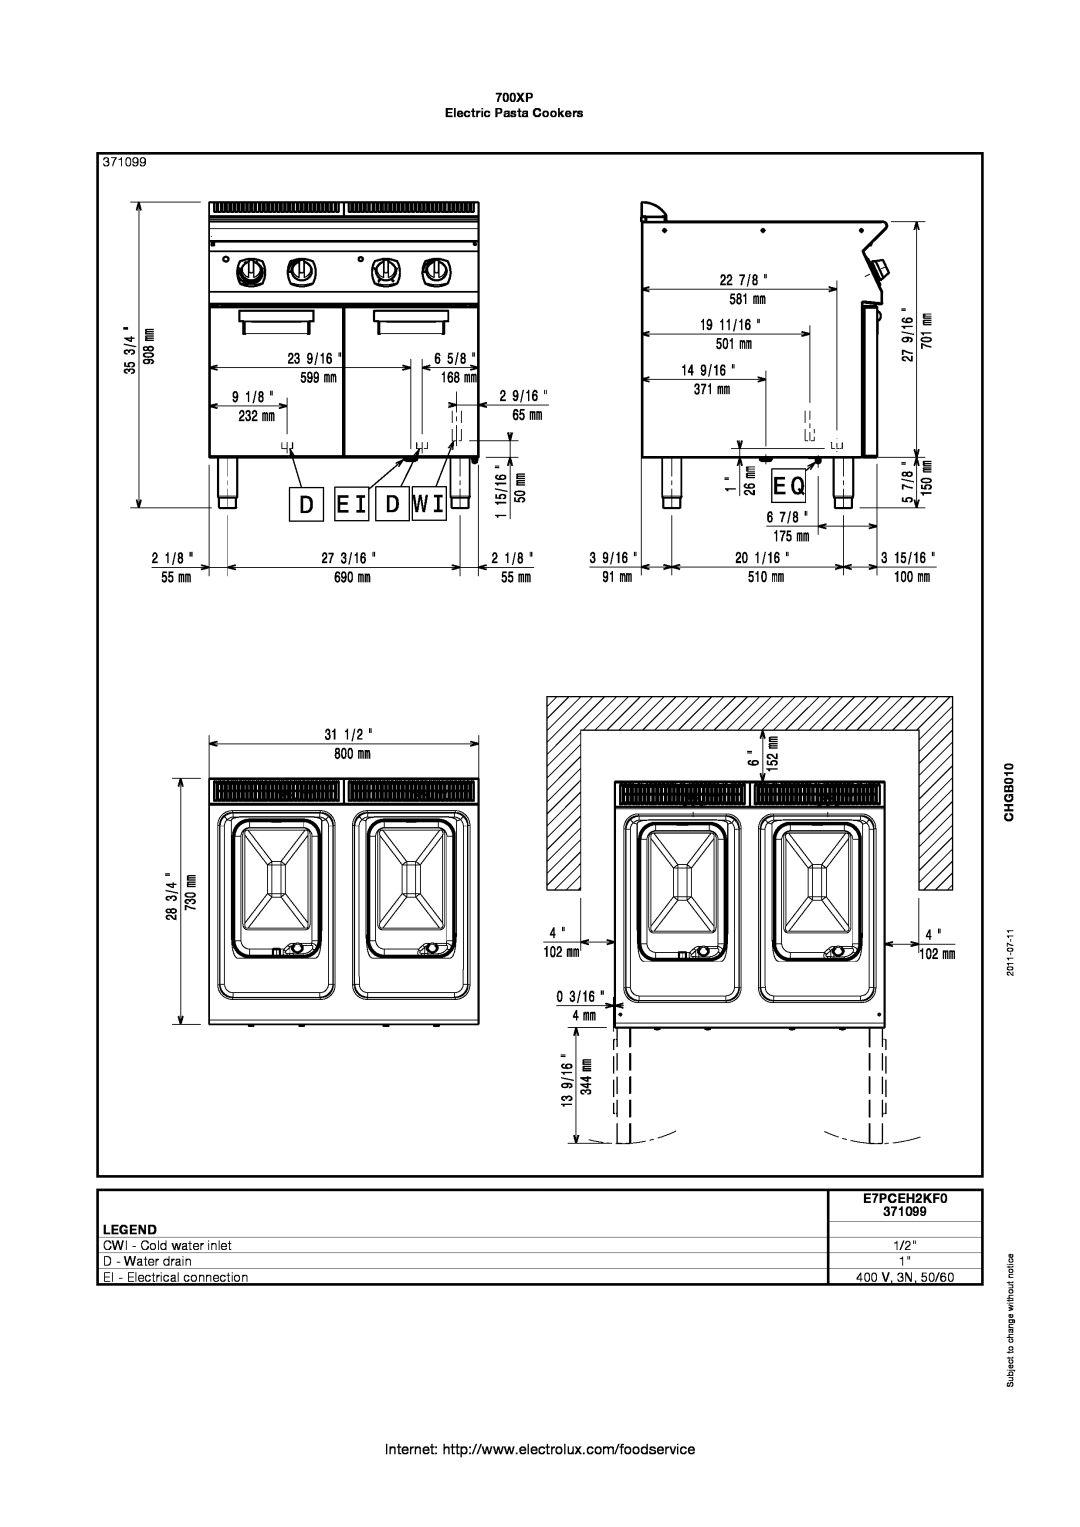 Electrolux manual 371099, 700XP Electric Pasta Cookers, CHGB010, E7PCEH2KF0, 2011-07-11, Subject to change without 